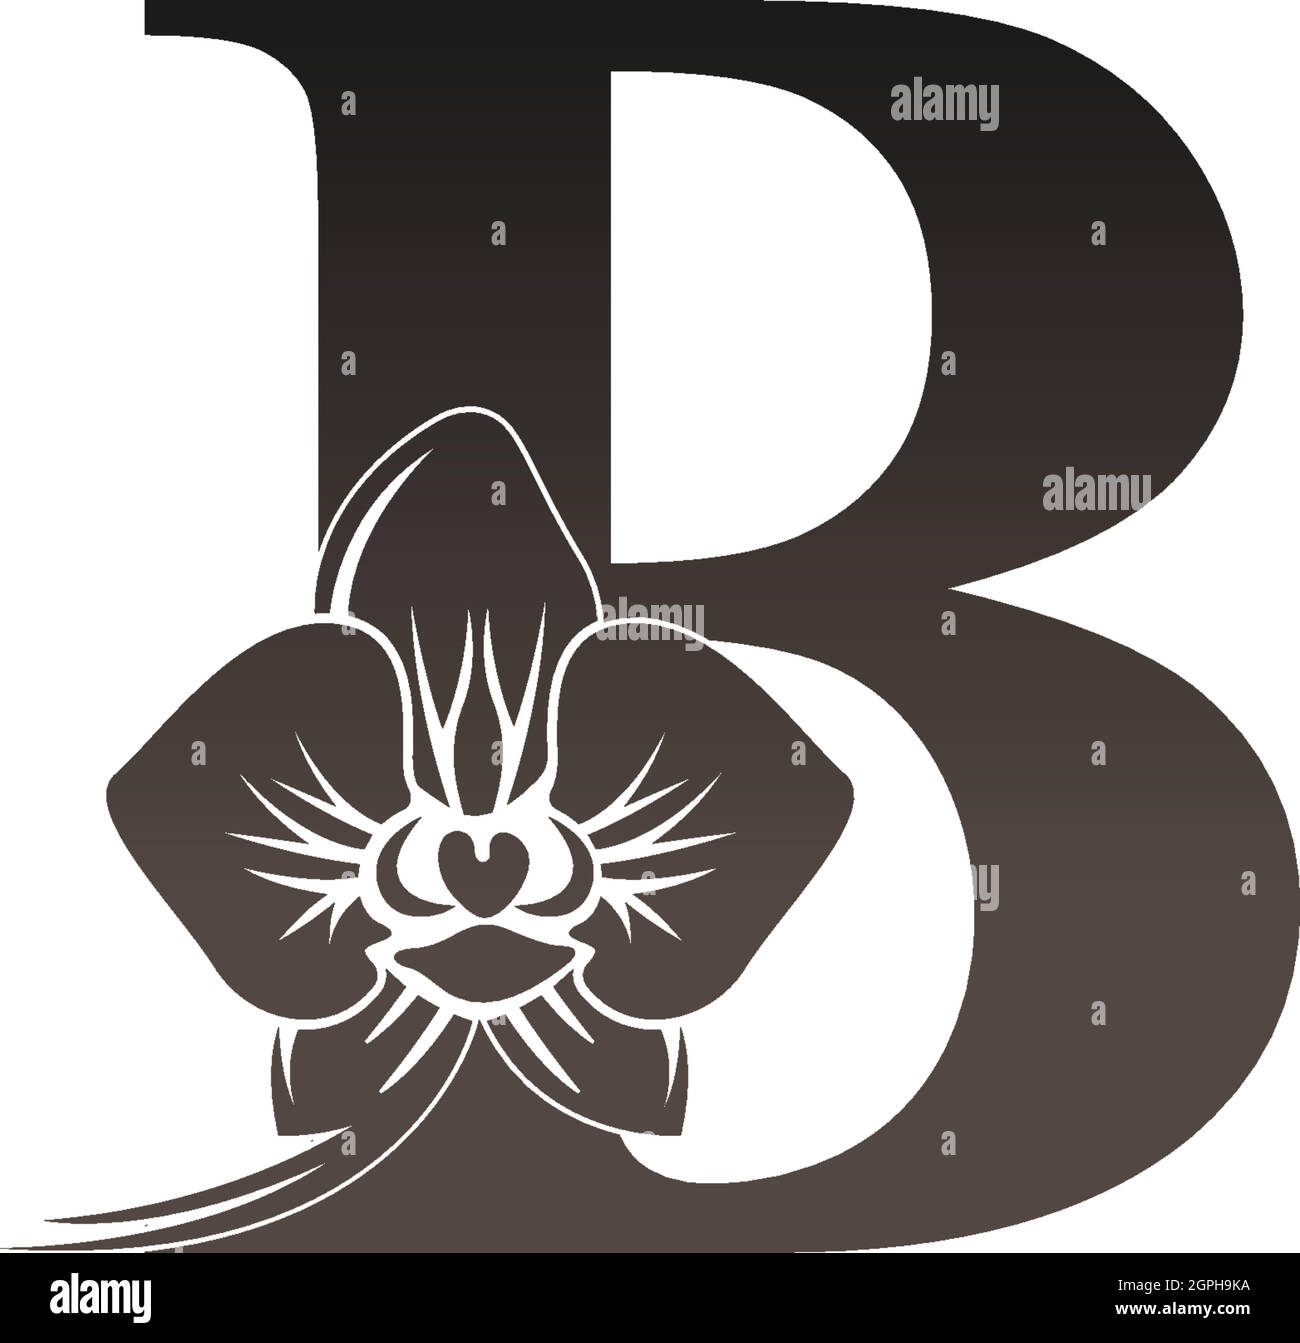 Letter B logo icon with black orchid design vector Stock Vector